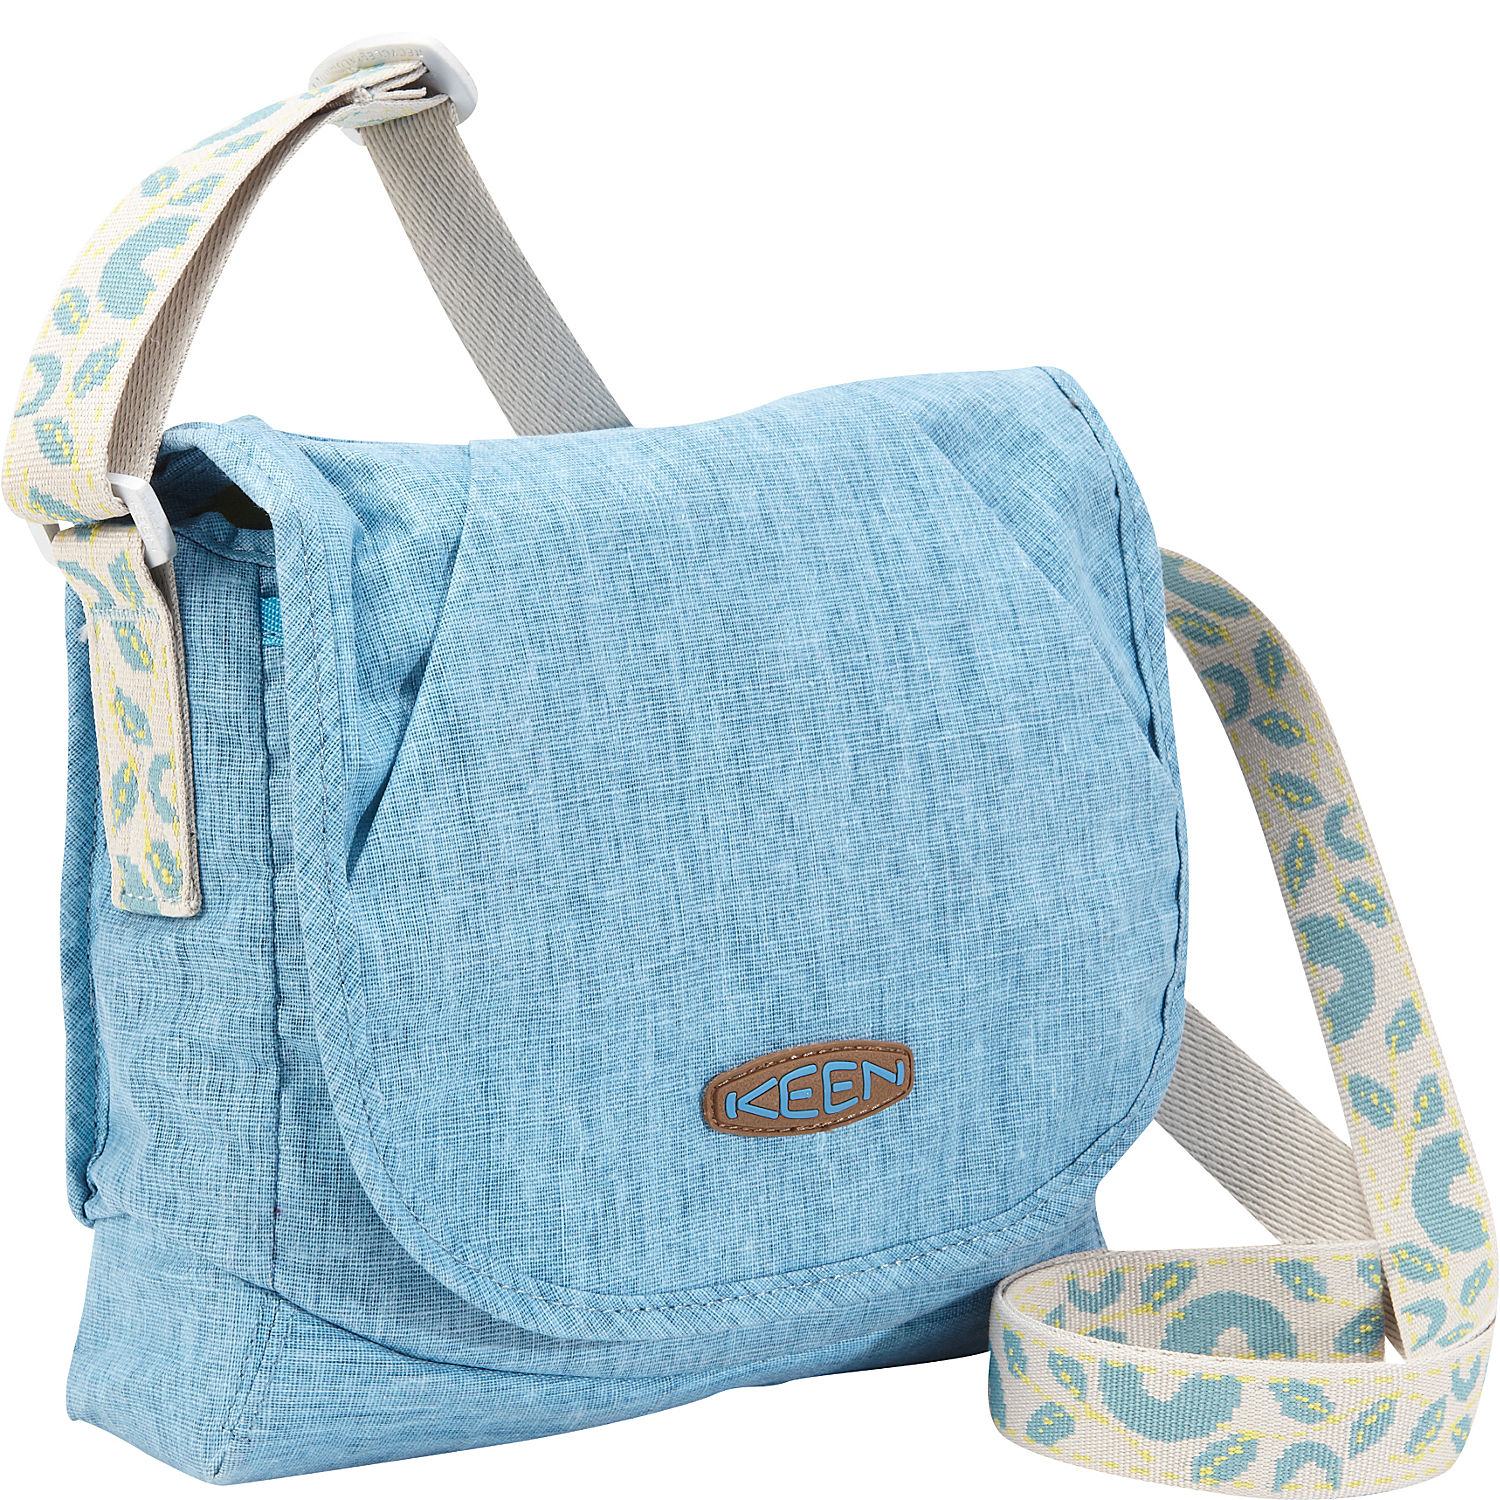 Keen Emerson Bag (Washed Linen) - eBags